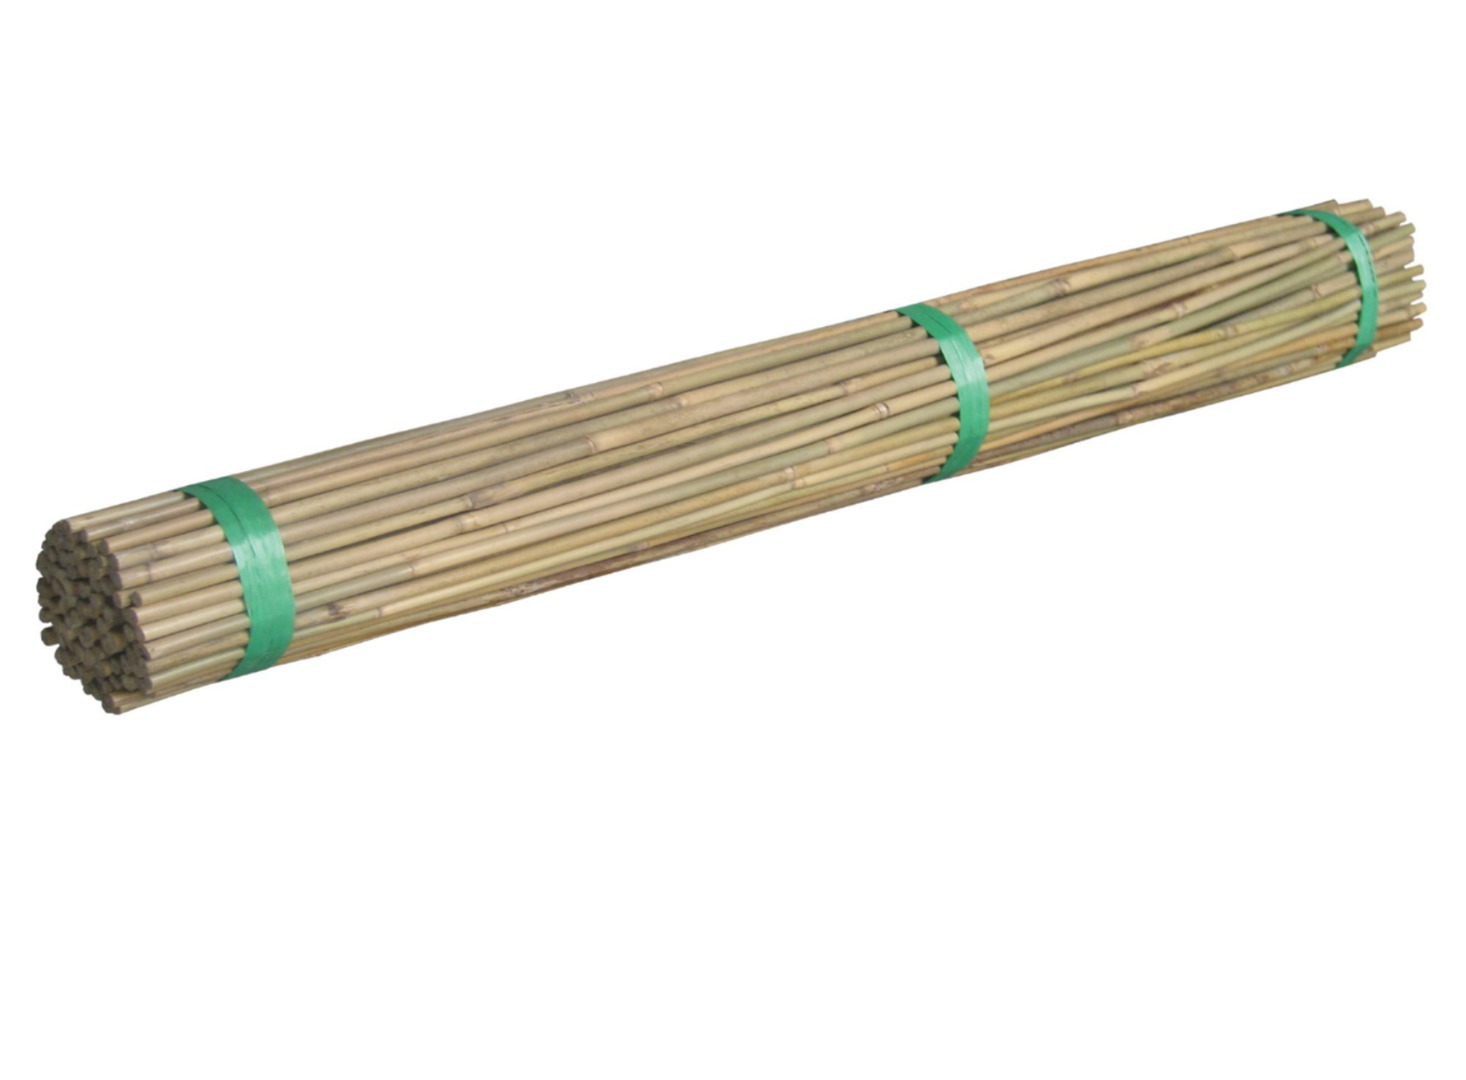 Bamboo Canes 500-2400mmL 100 Pack image 0